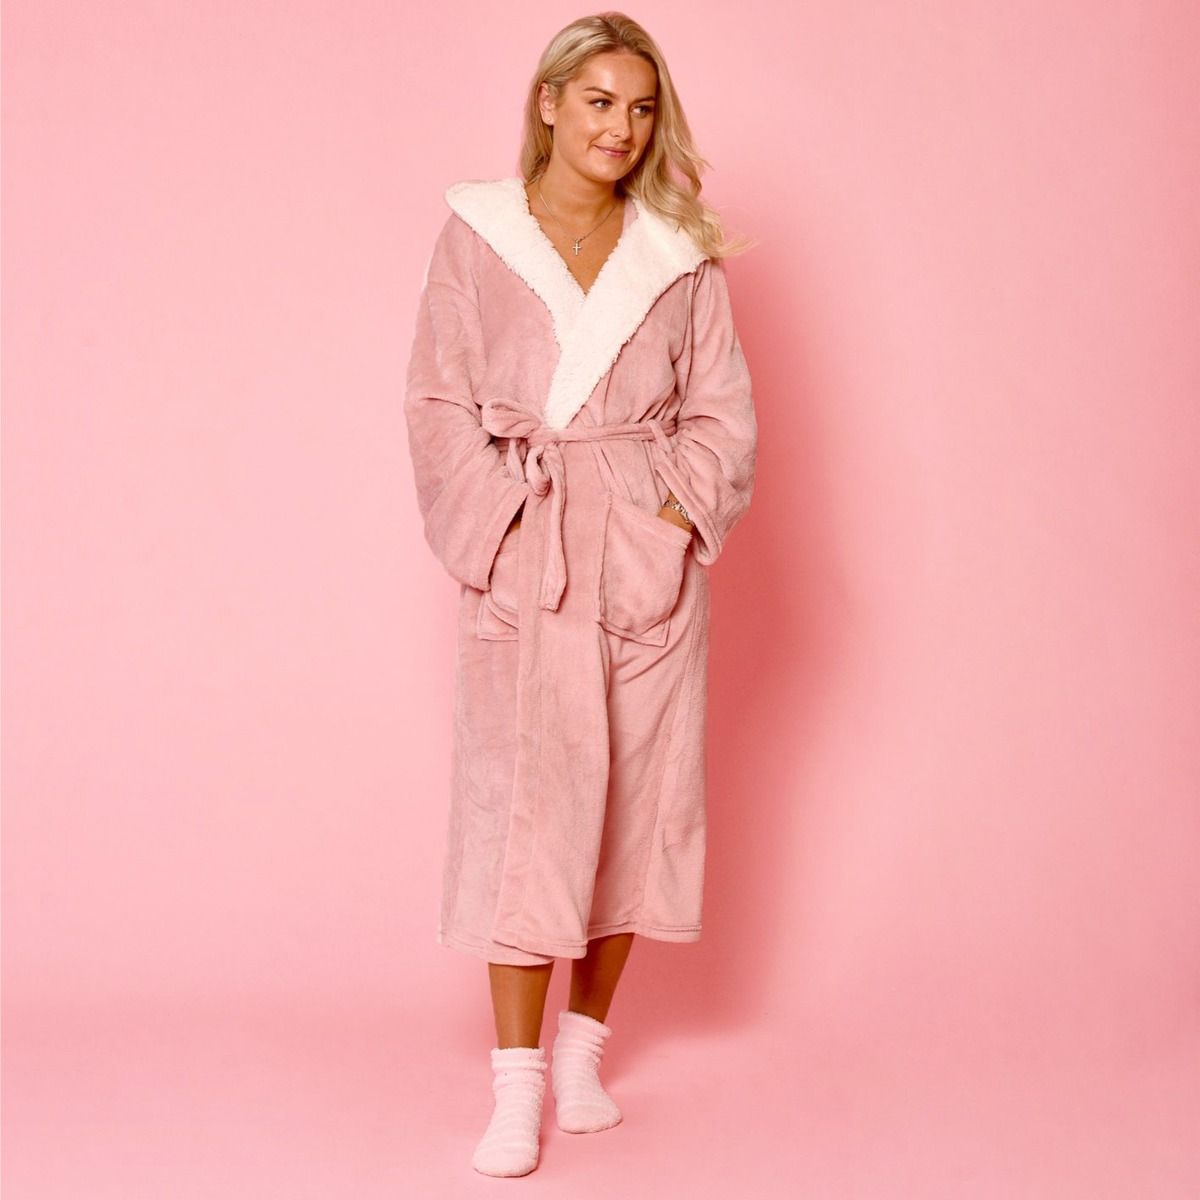 Best blanket hoodies UK 2023: From Oodie to Onesnug | The Independent